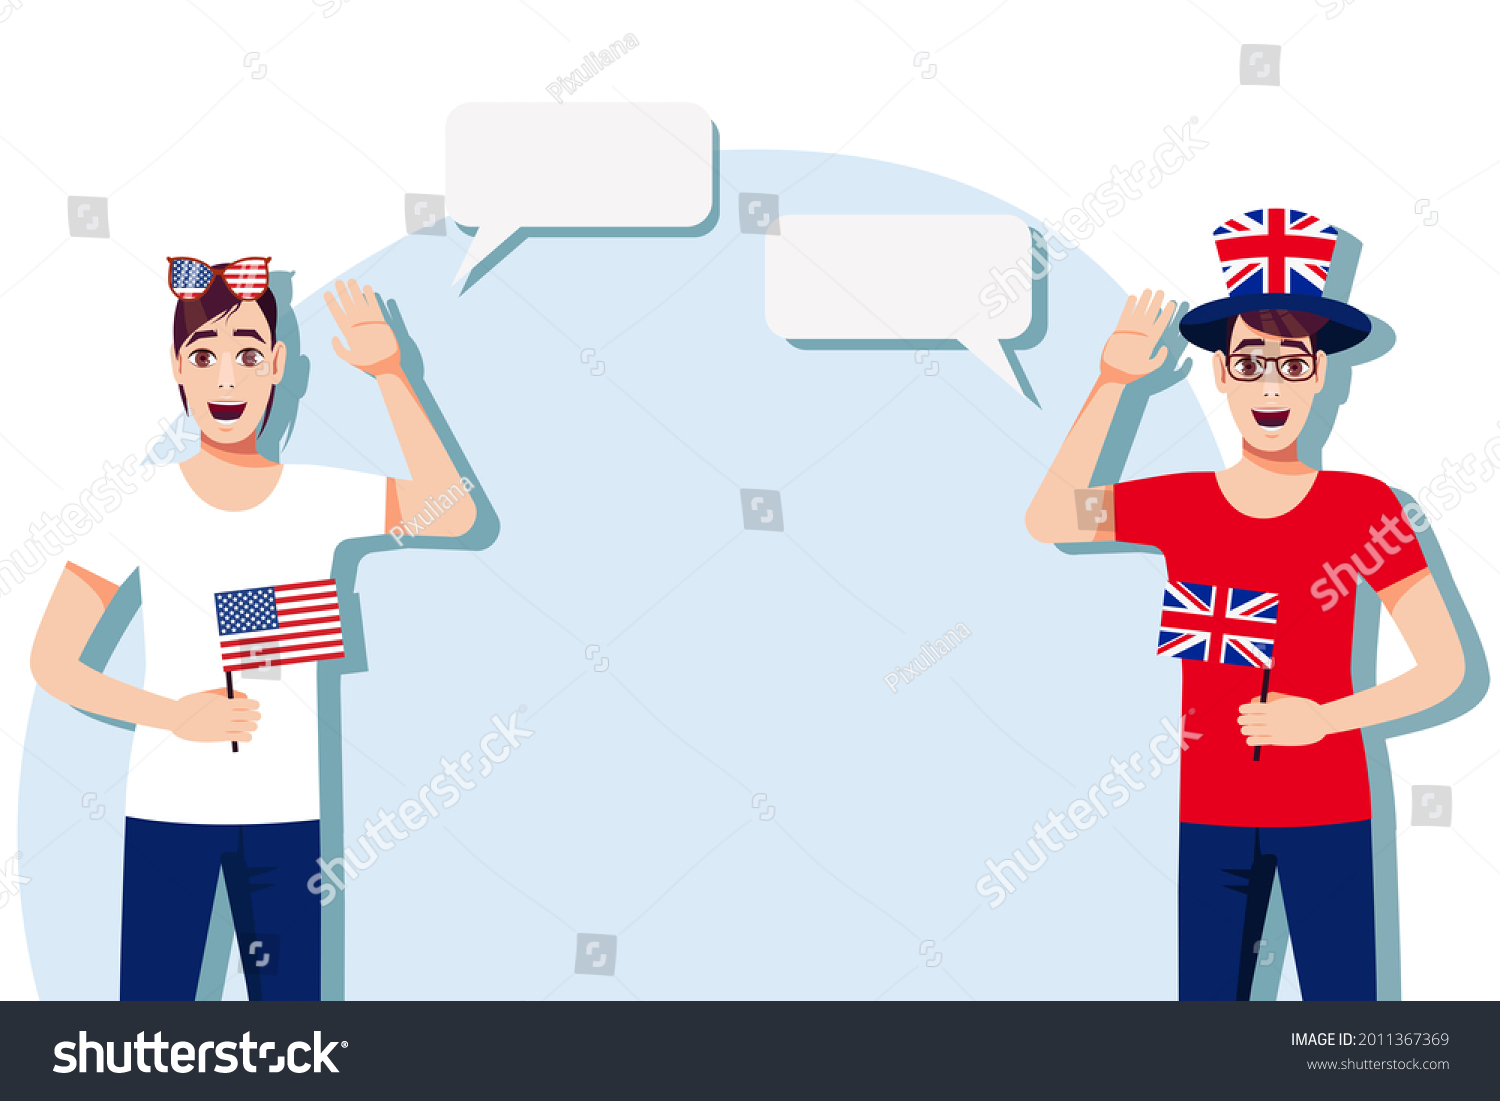 SVG of Men with American and British flags. Background for the text. Communication between native speakers of the language. Vector illustration. svg